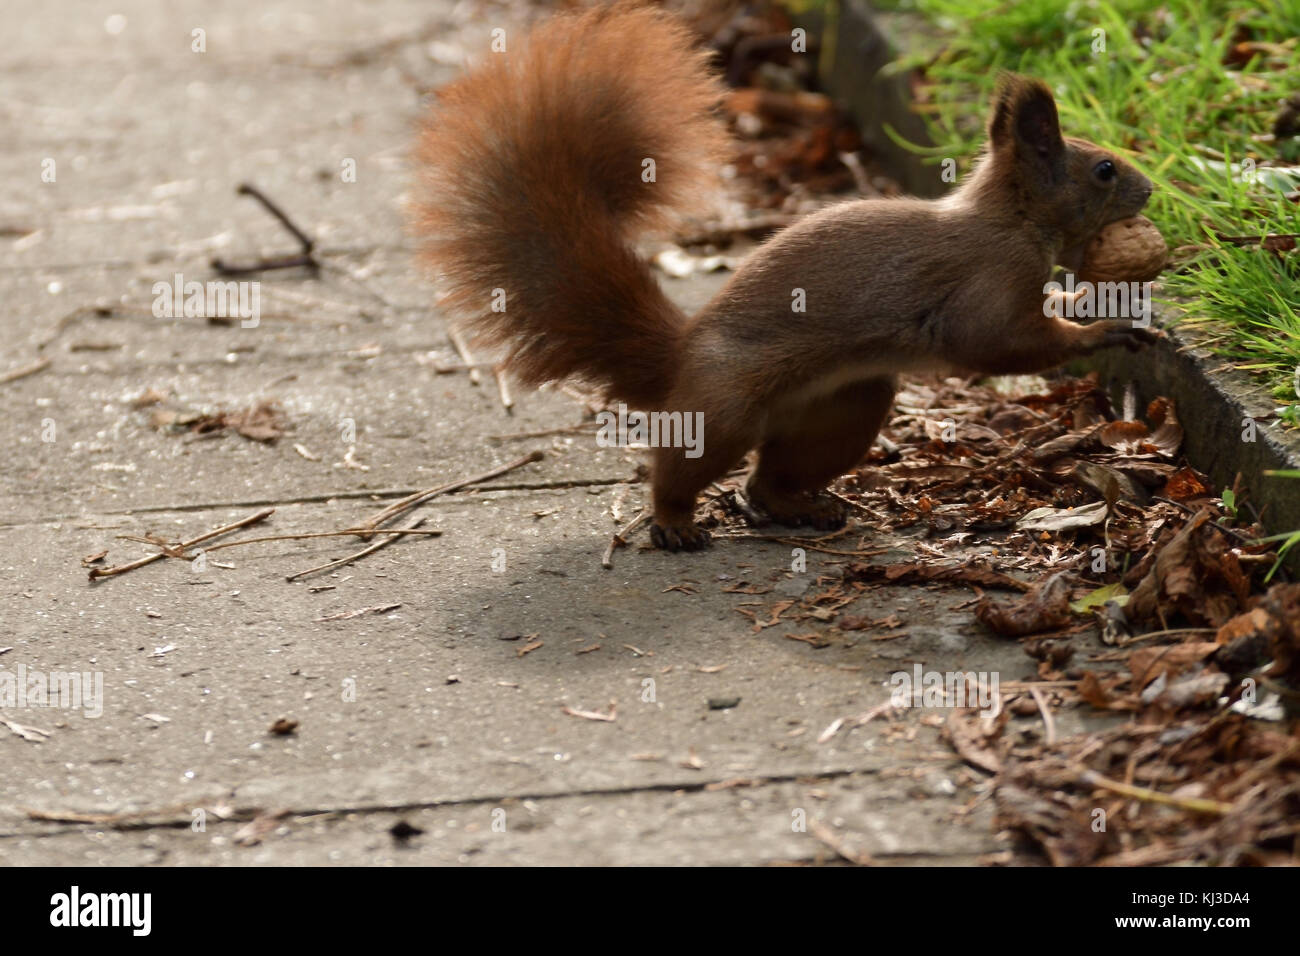 the squirrel hides the walnuts in the ground for the winter	 the squirrel hides the walnuts in the ground for the winter Stock Photo